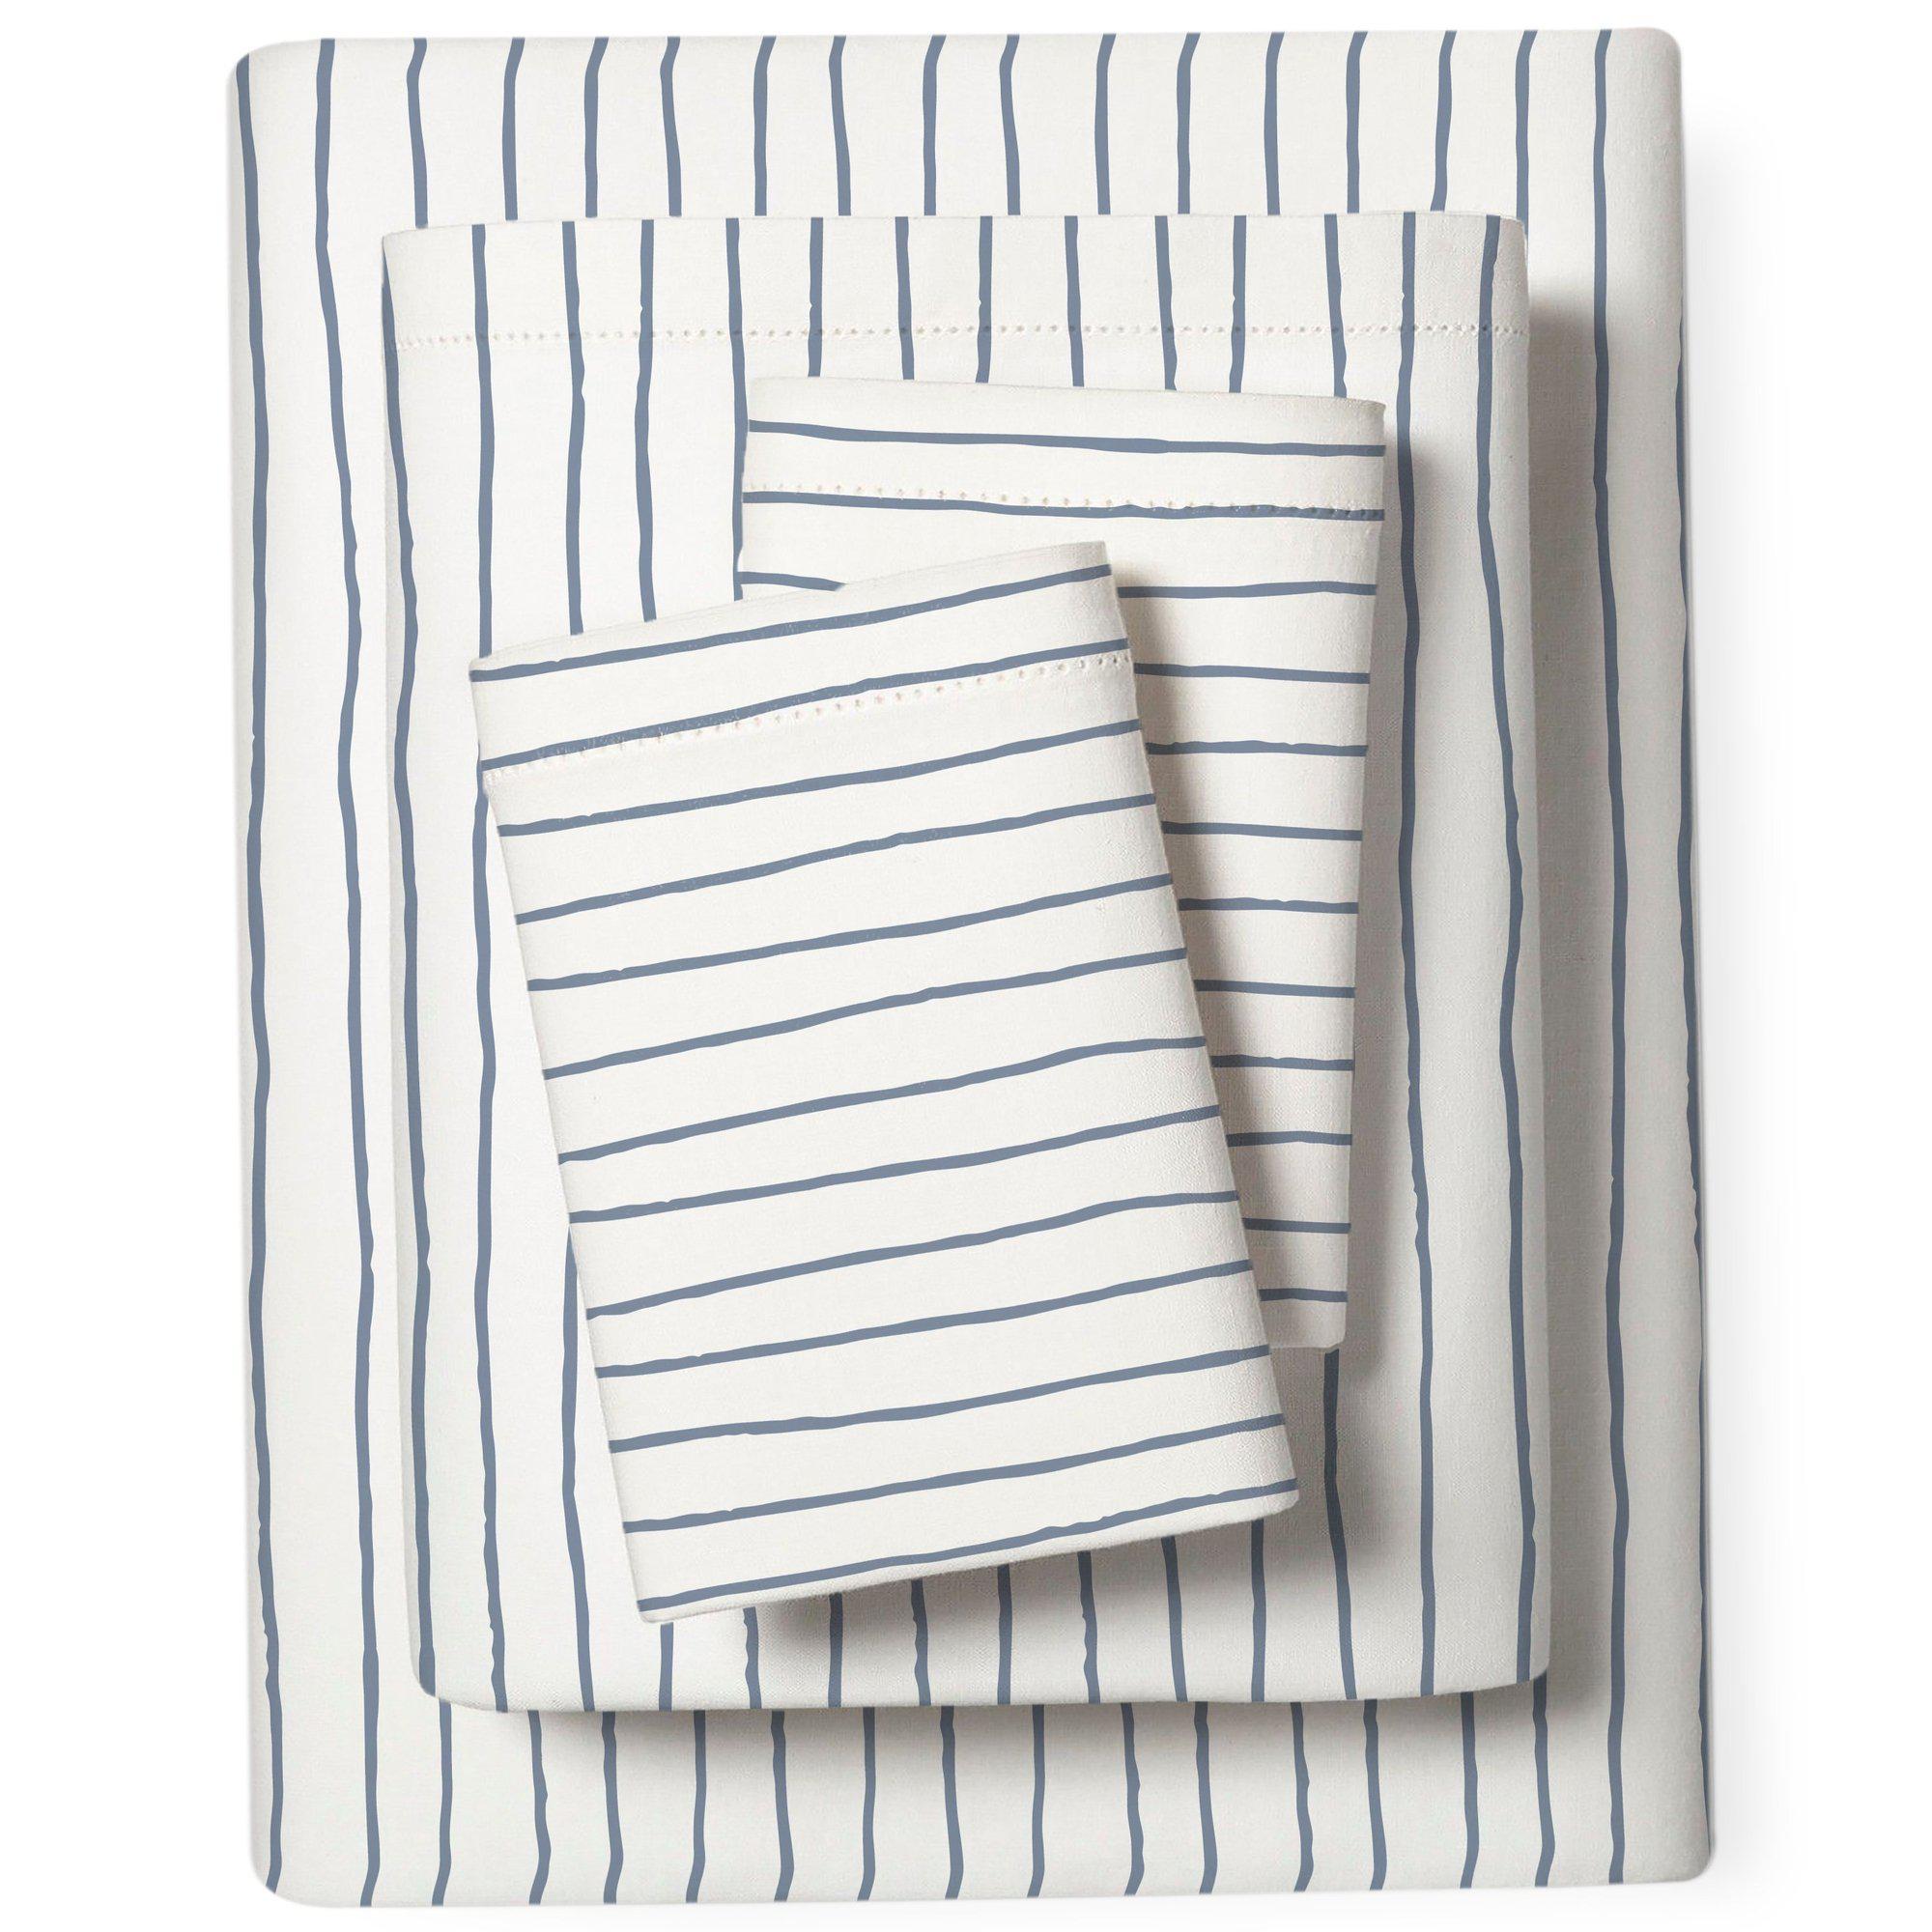 A white bedding set with navy blue stripes, including a folded duvet cover and a top sheet of the Organic Cotton Sheet Set - Cobi Blue Stripes by Makemake Organics, neatly arranged on a plain background.